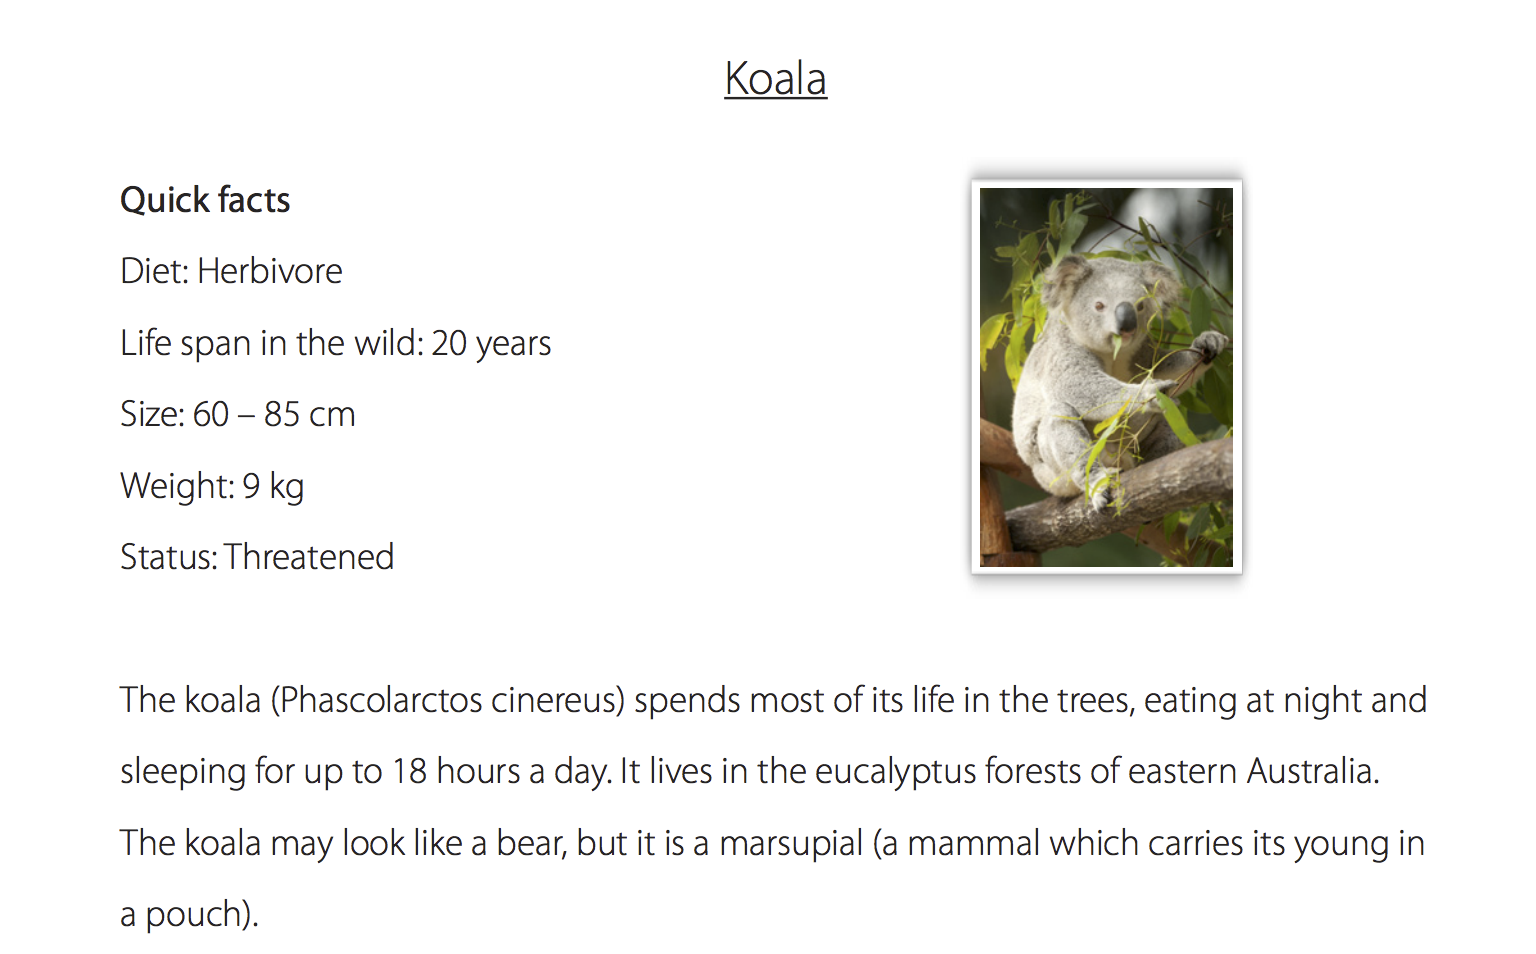 Reading Comprehension - Facts About Koalas